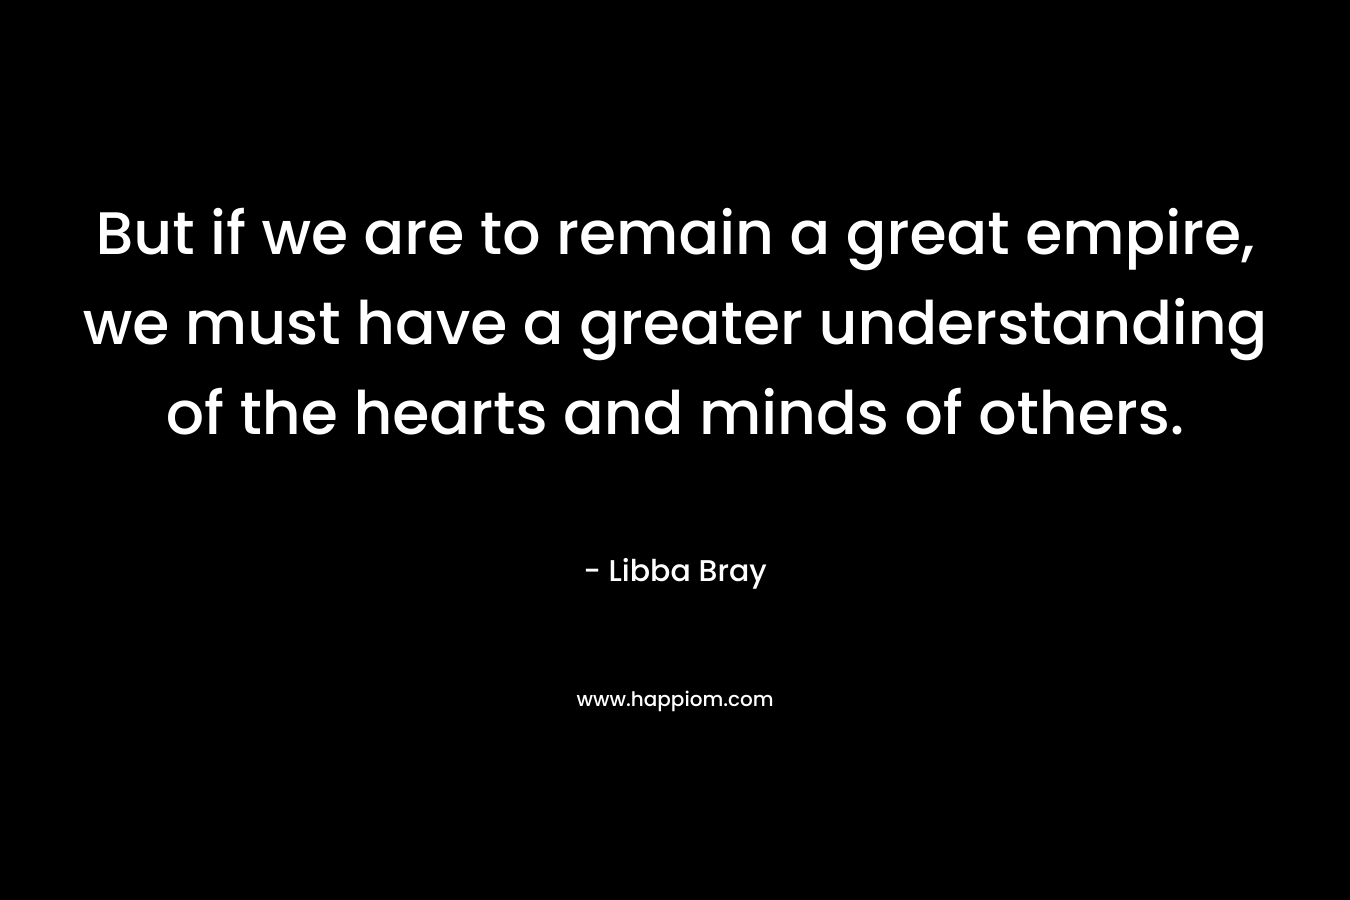 But if we are to remain a great empire, we must have a greater understanding of the hearts and minds of others.